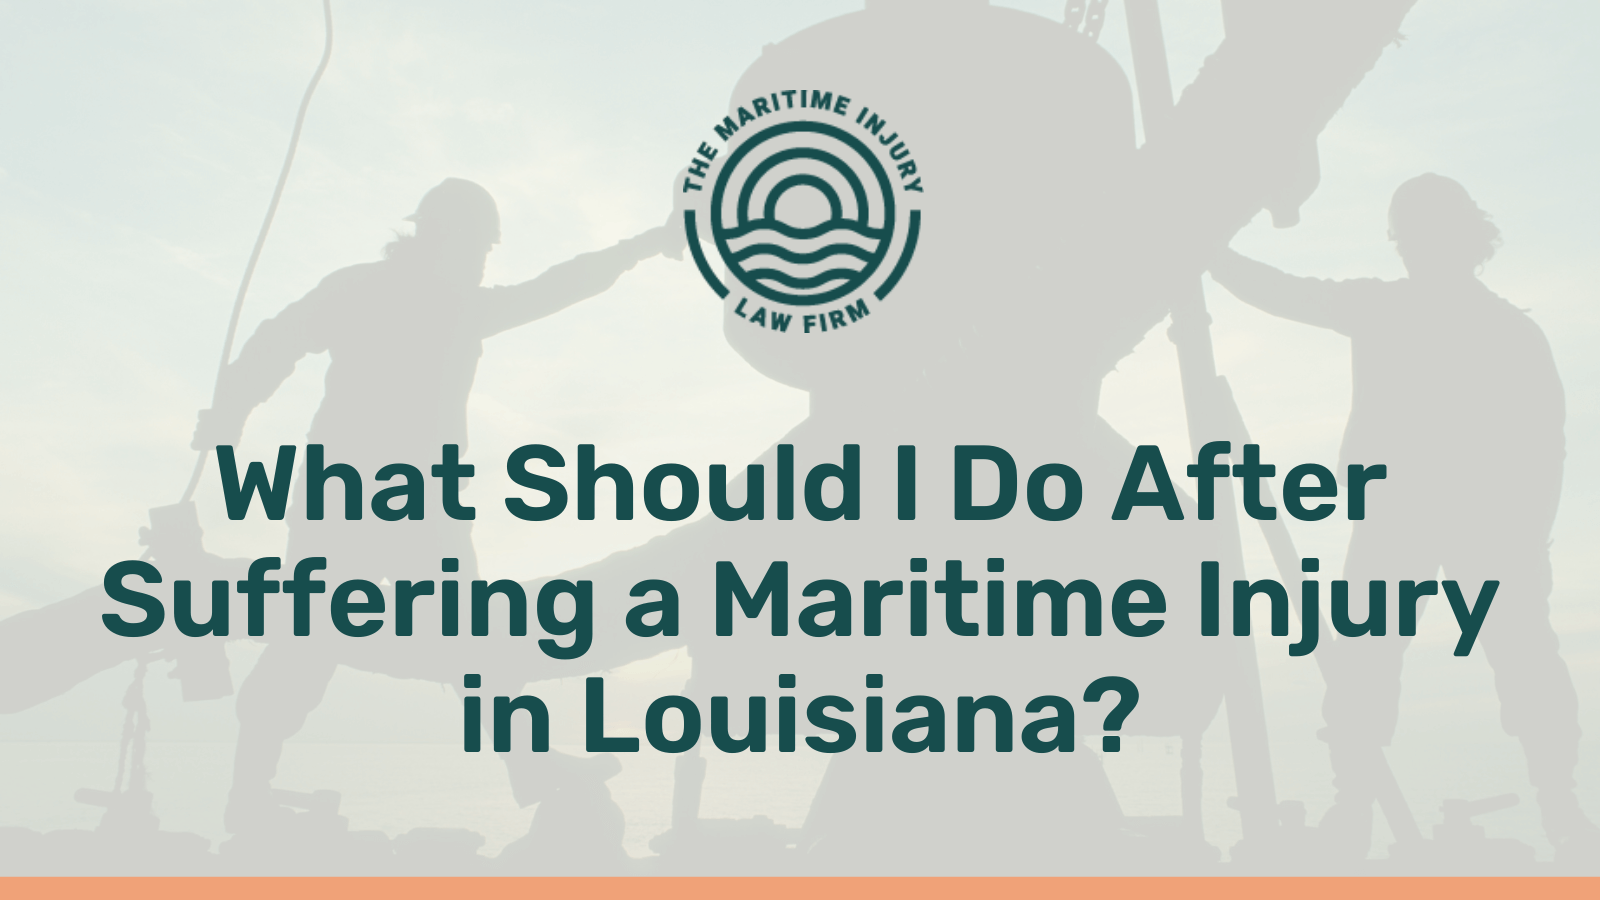 What Should I Do After Suffering a Maritime Injury in Louisiana - maritime injury law firm - George Vourvoulias